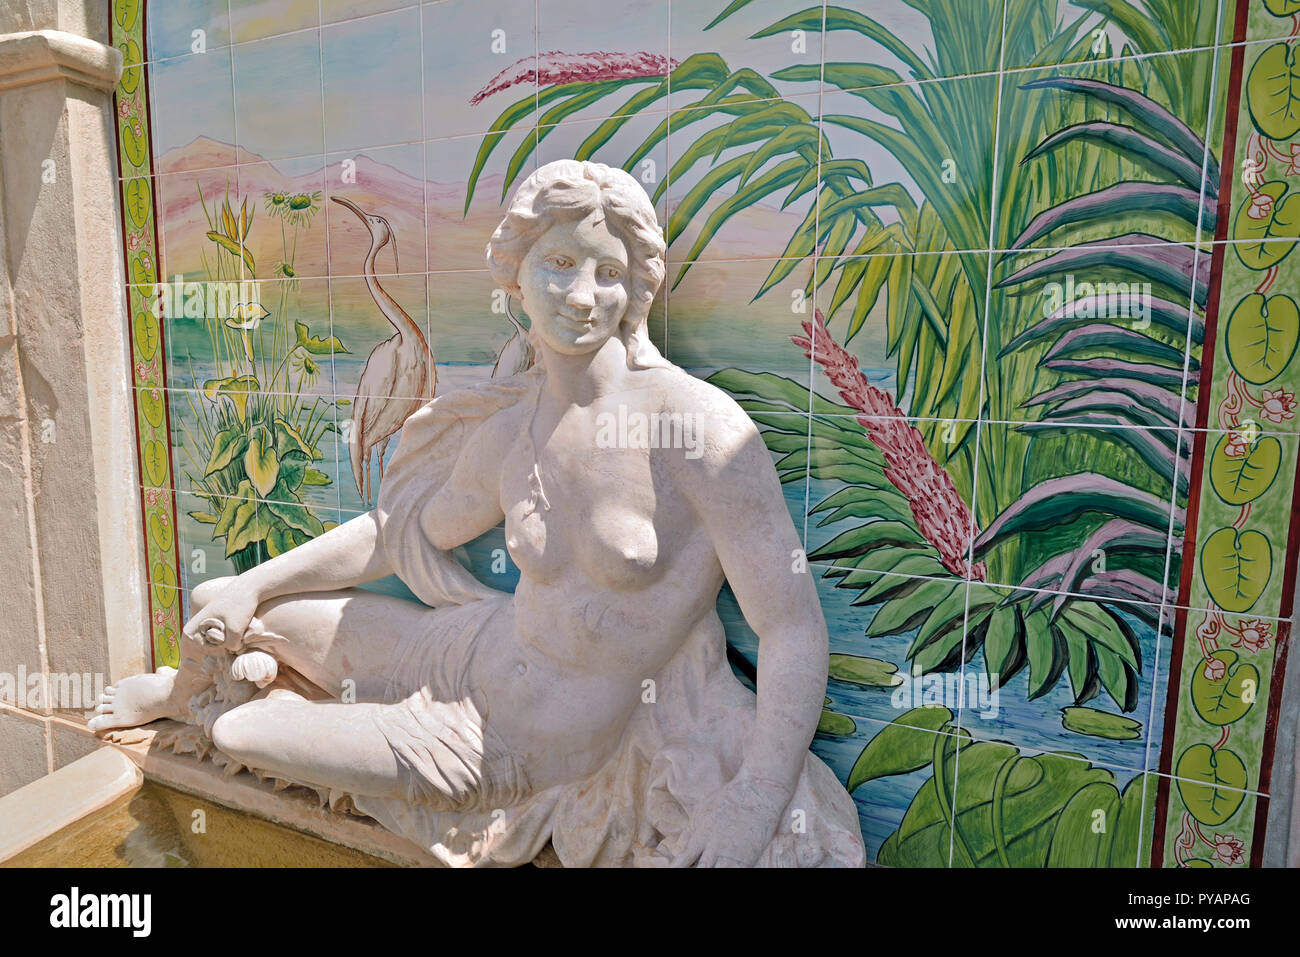 Statue of mythological figure in front of painted tiles with exotic scenery Stock Photo